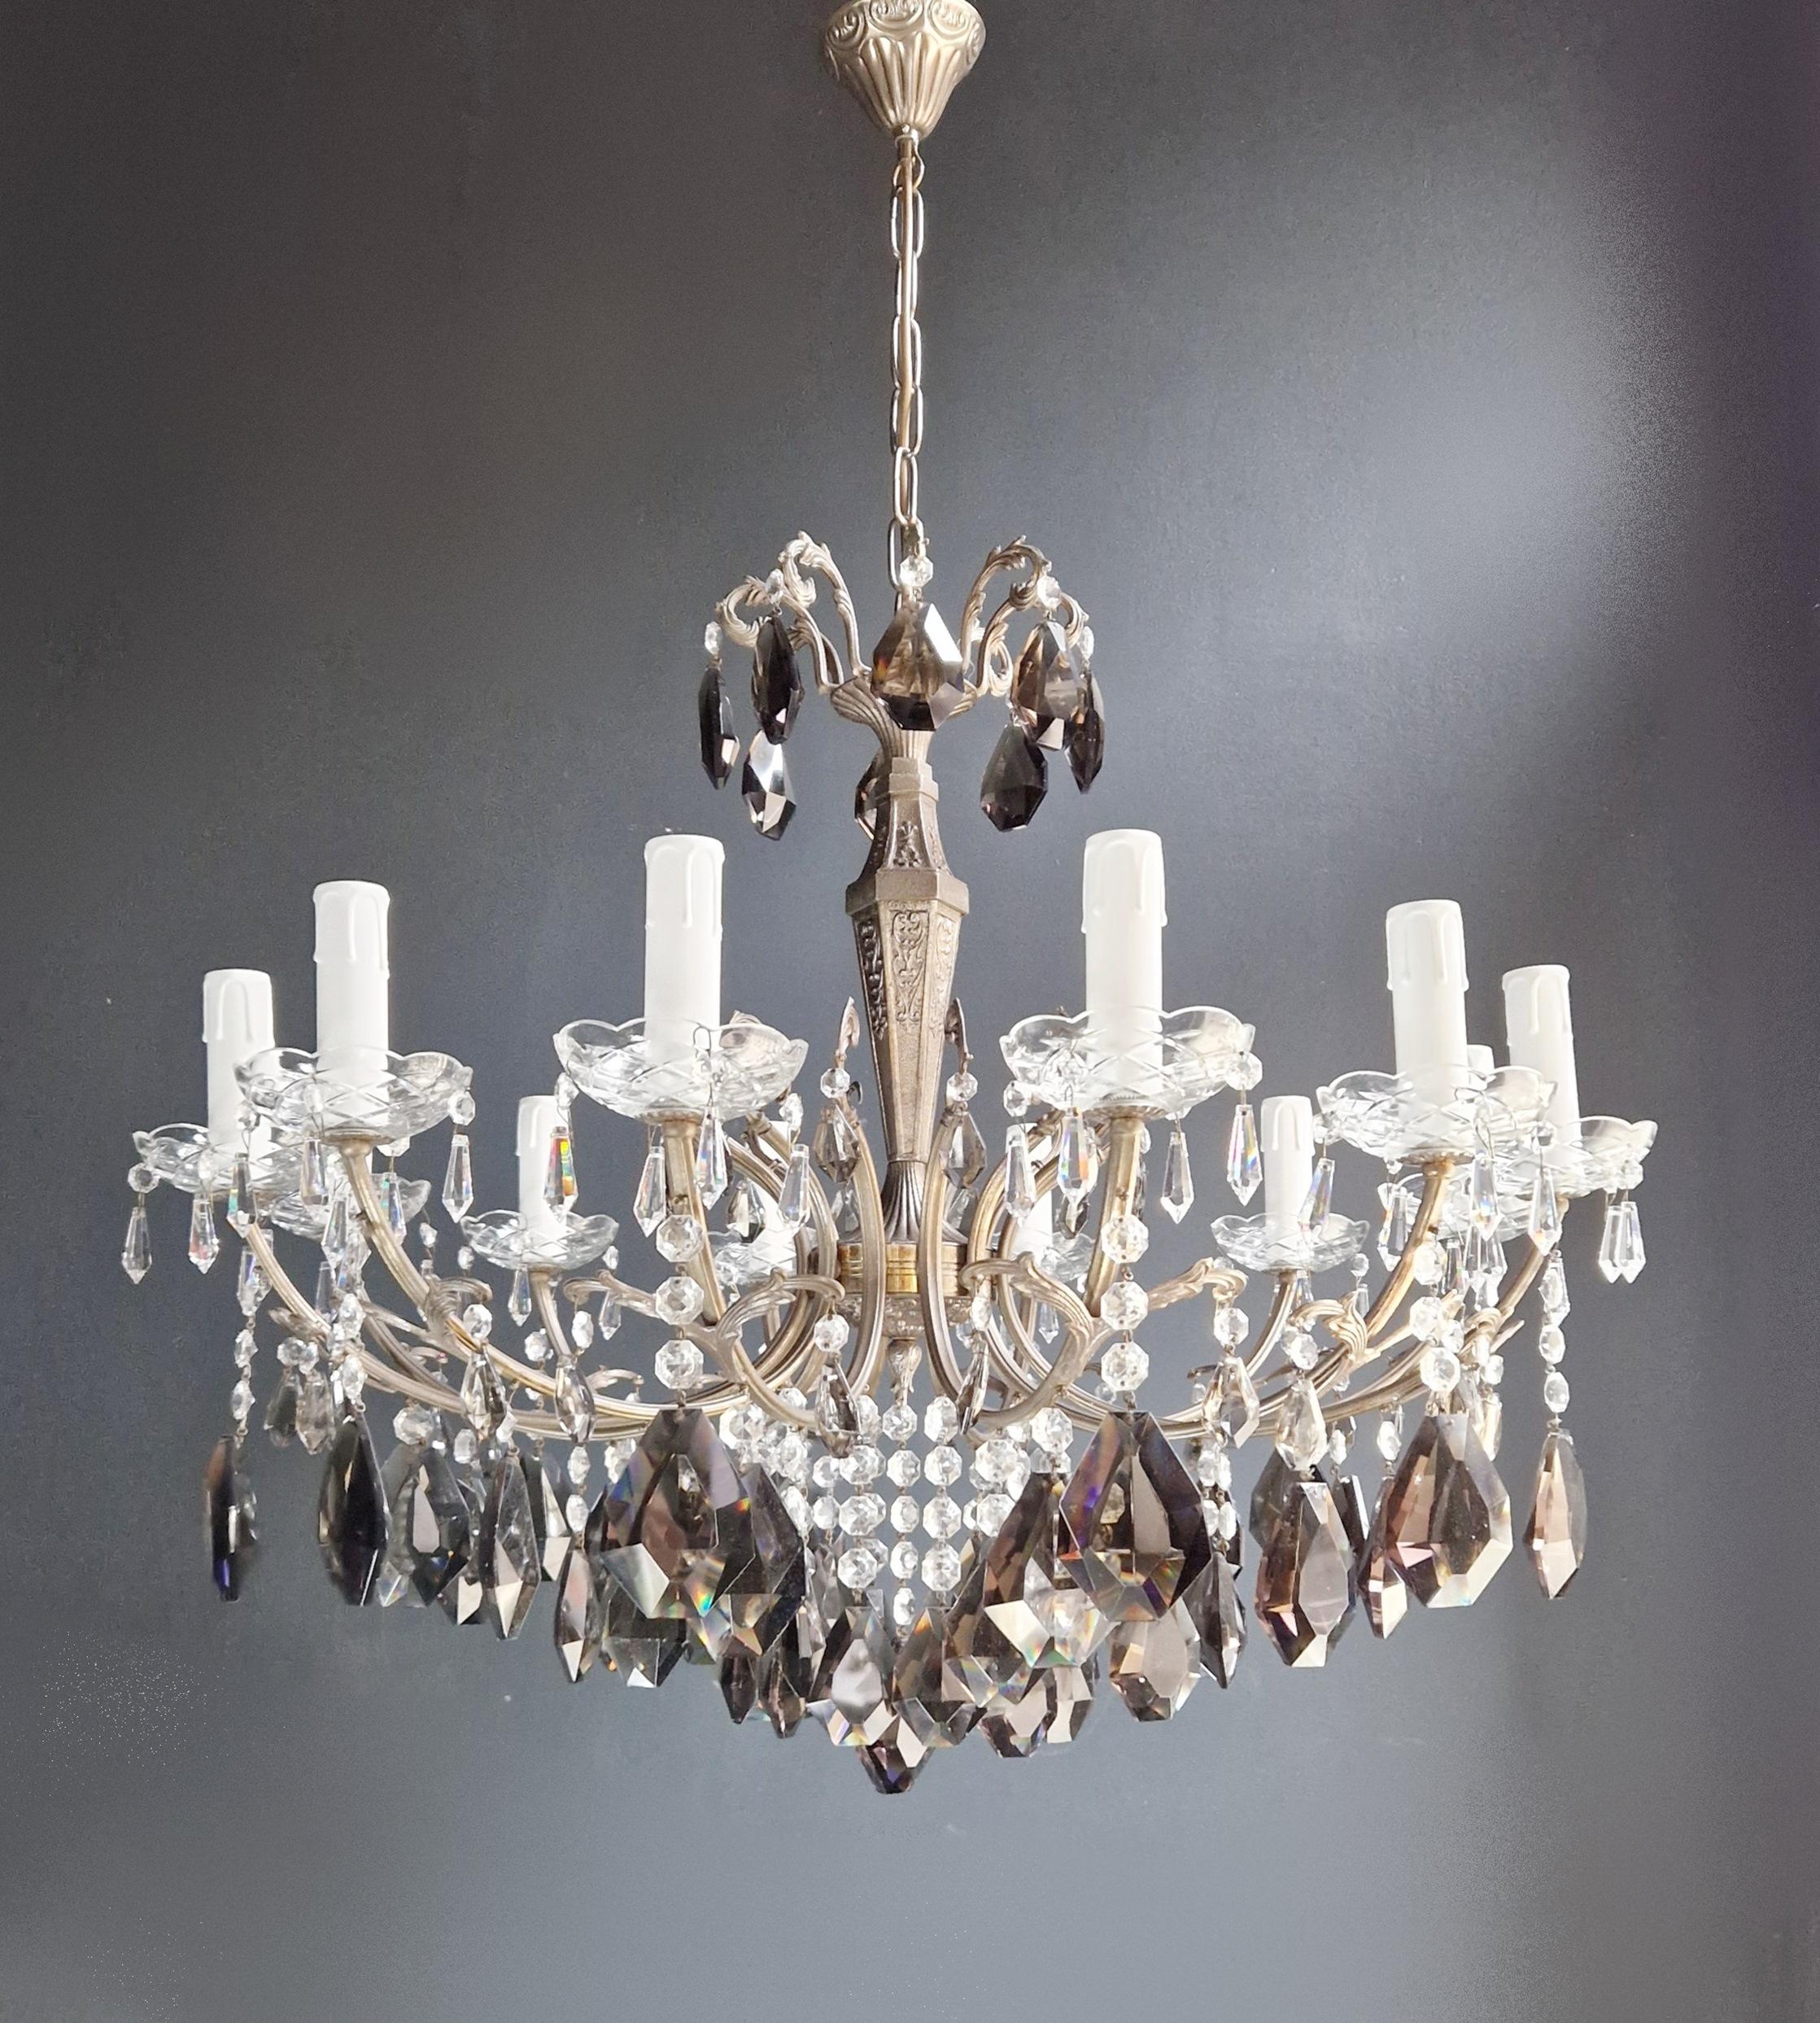 Old chandelier with love and professionally restored in Berlin. electrical wiring works in the US.
Re-wired and ready to hang
not one missing
Cabling completely renewed. Crystal, hand-knotted.
Measures: Total height 99 cm, height without chain 70